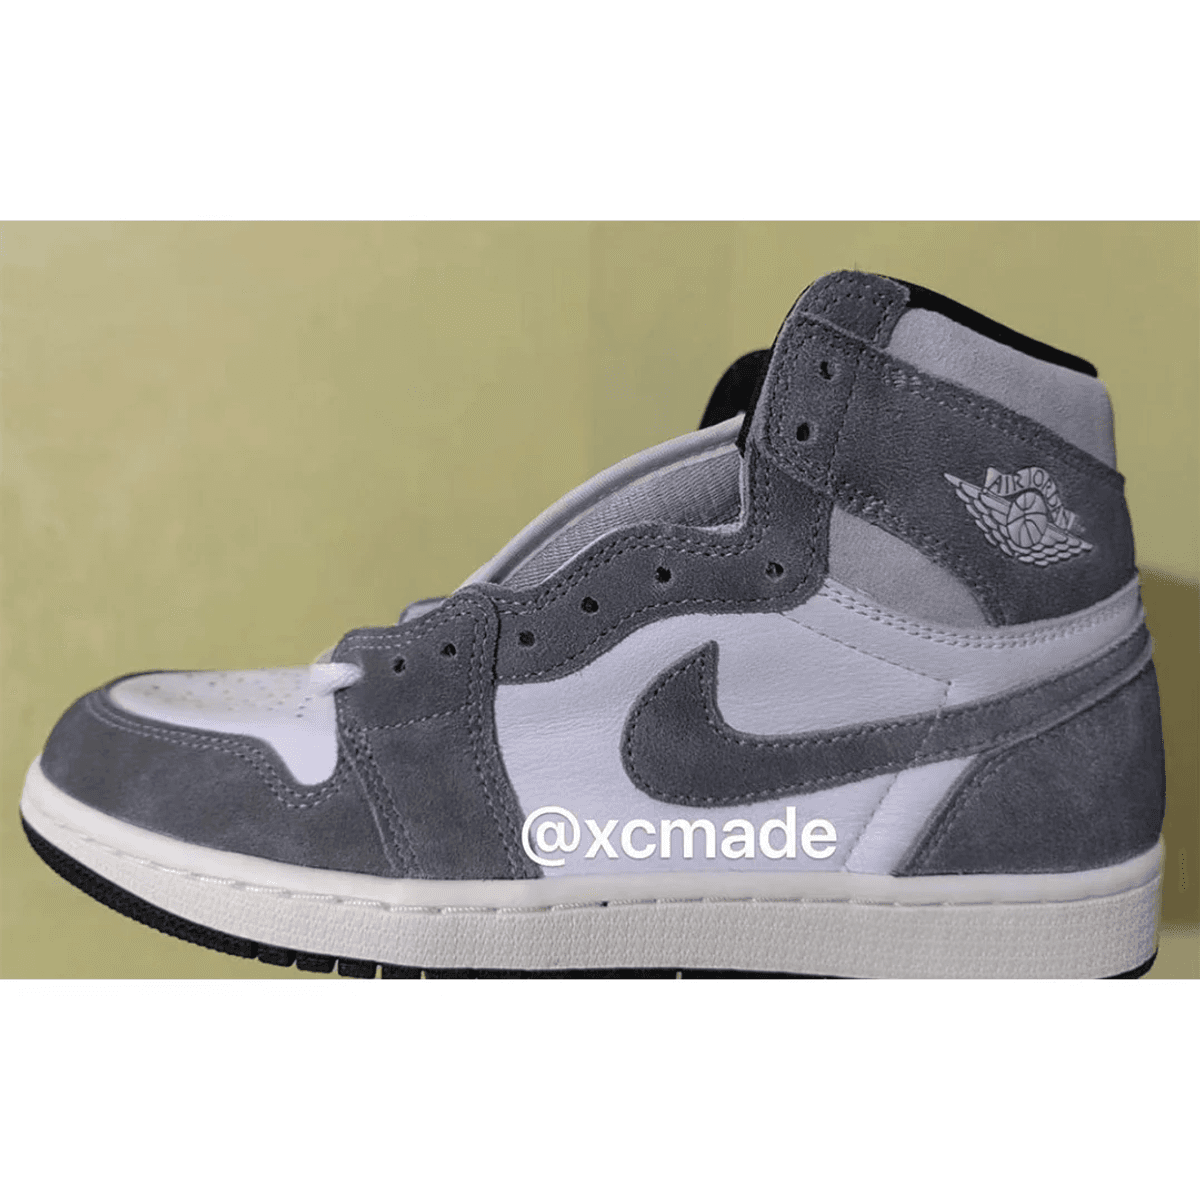 First Look At The Air Jordan 1 High OG Washed Heritage